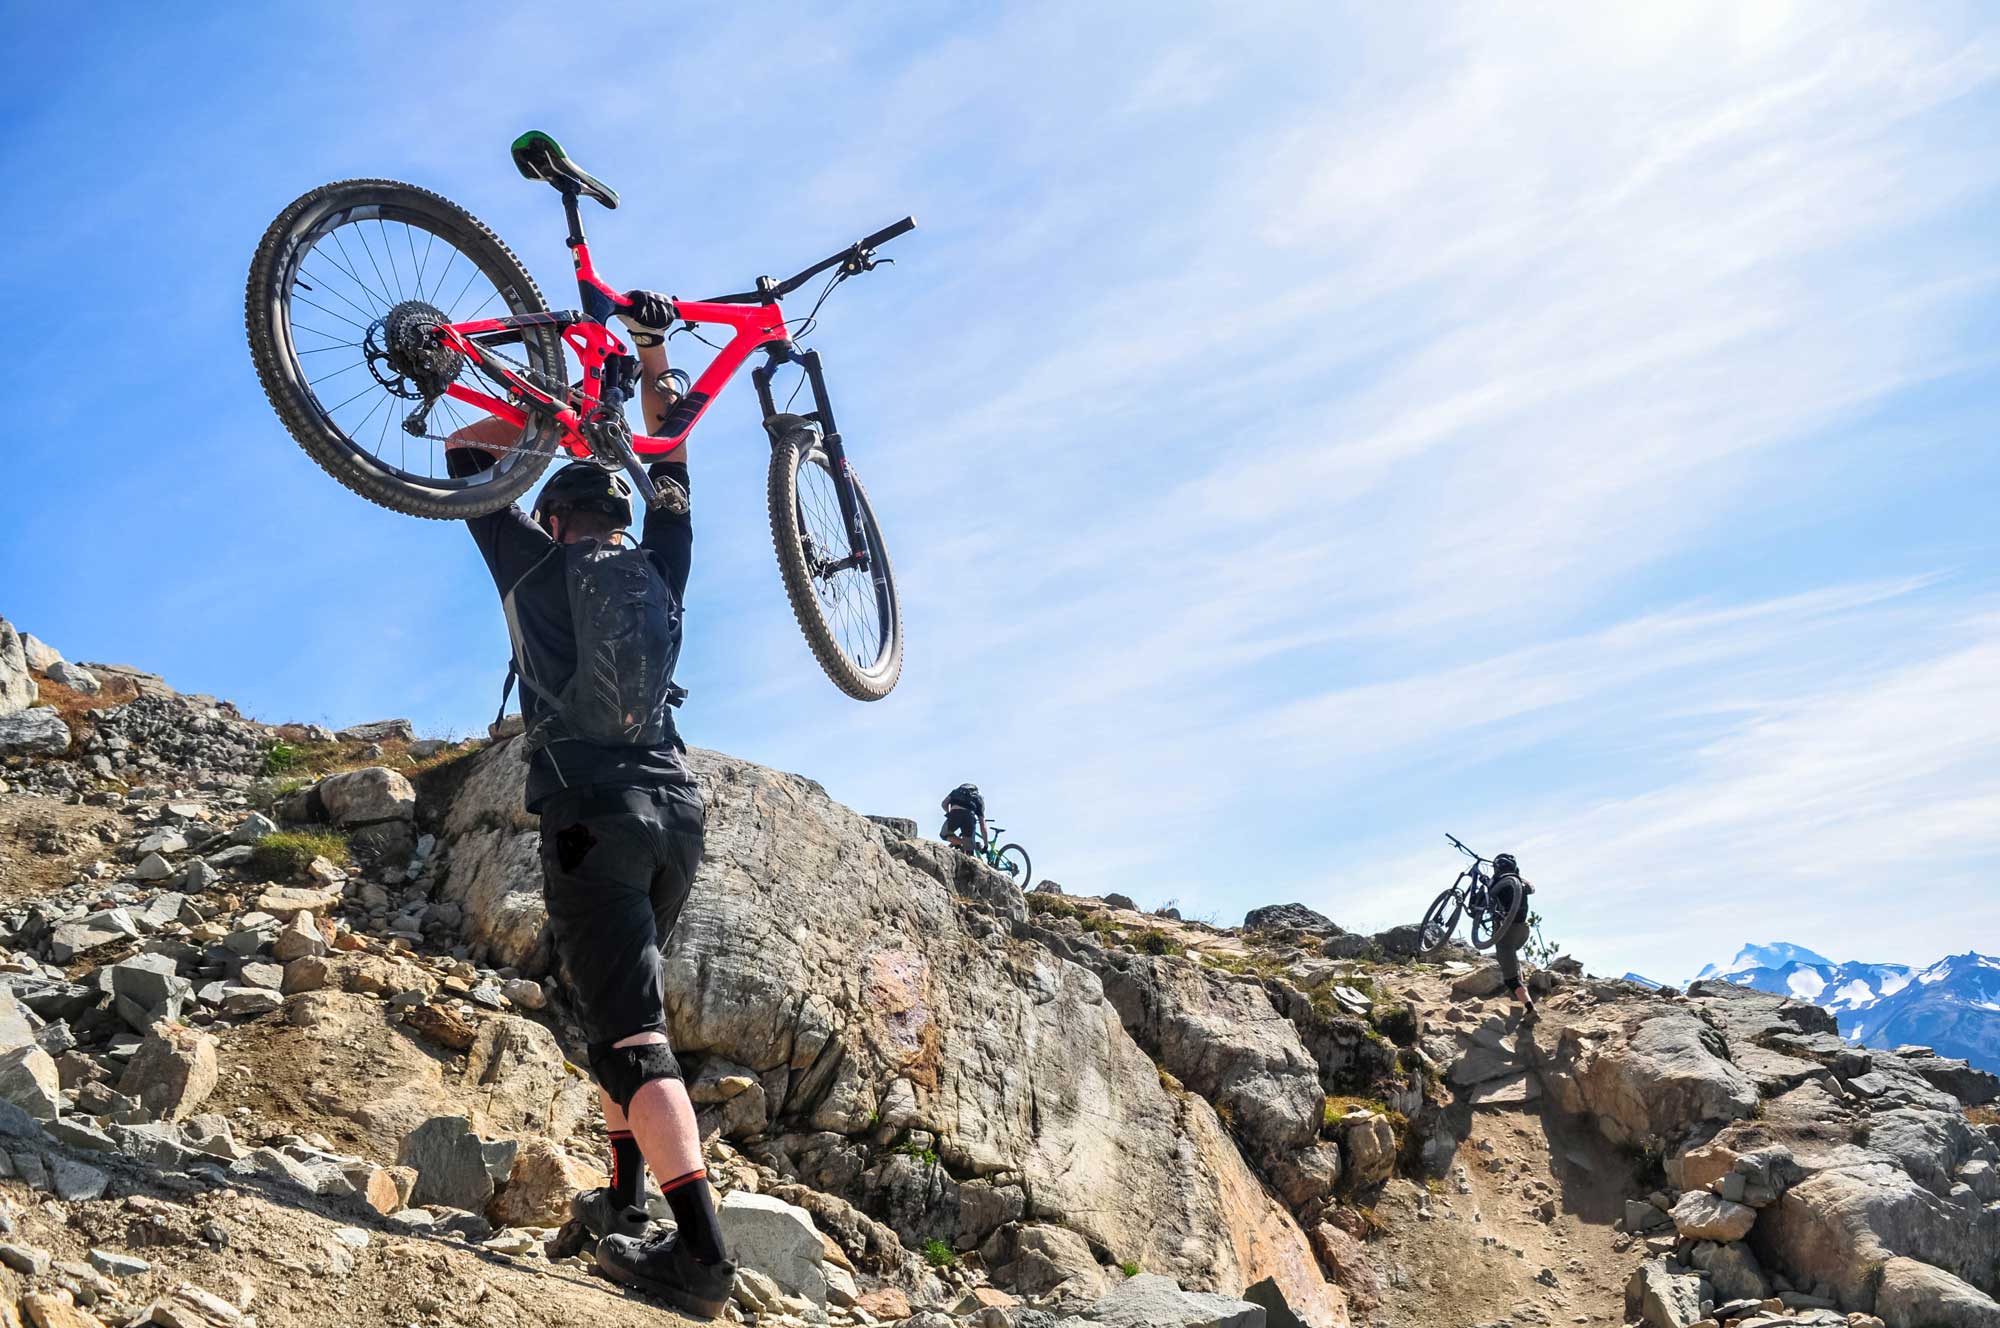 on rocky terrain, a man holds a red mountain bike over his head; two more mountain bikers ride in the background